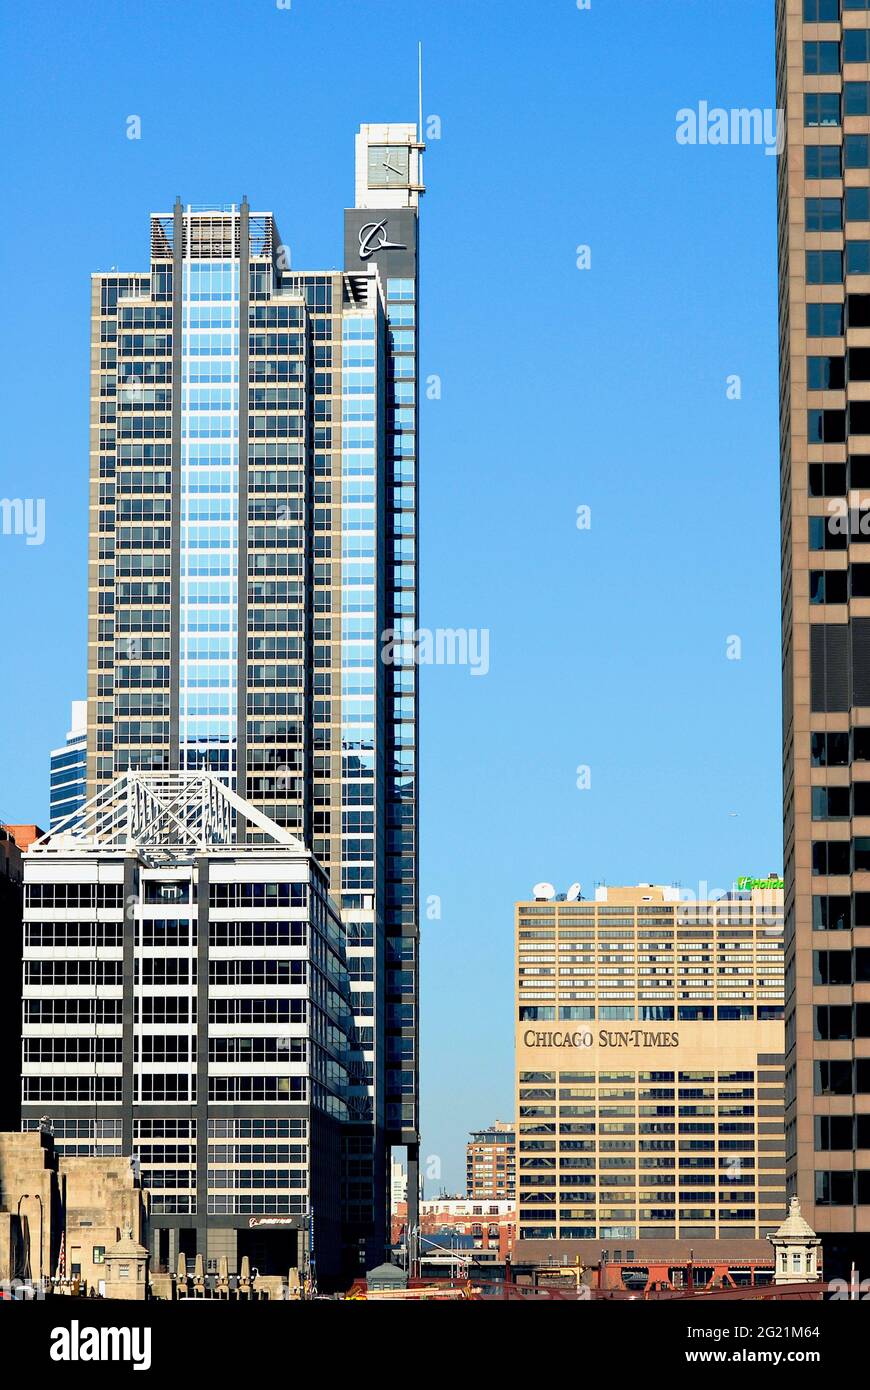 The Boeing Company's International Headquarters and the Chicago Sun-Times buildings are well-known landmarks in downtown Chicago, Illinois. Stock Photo